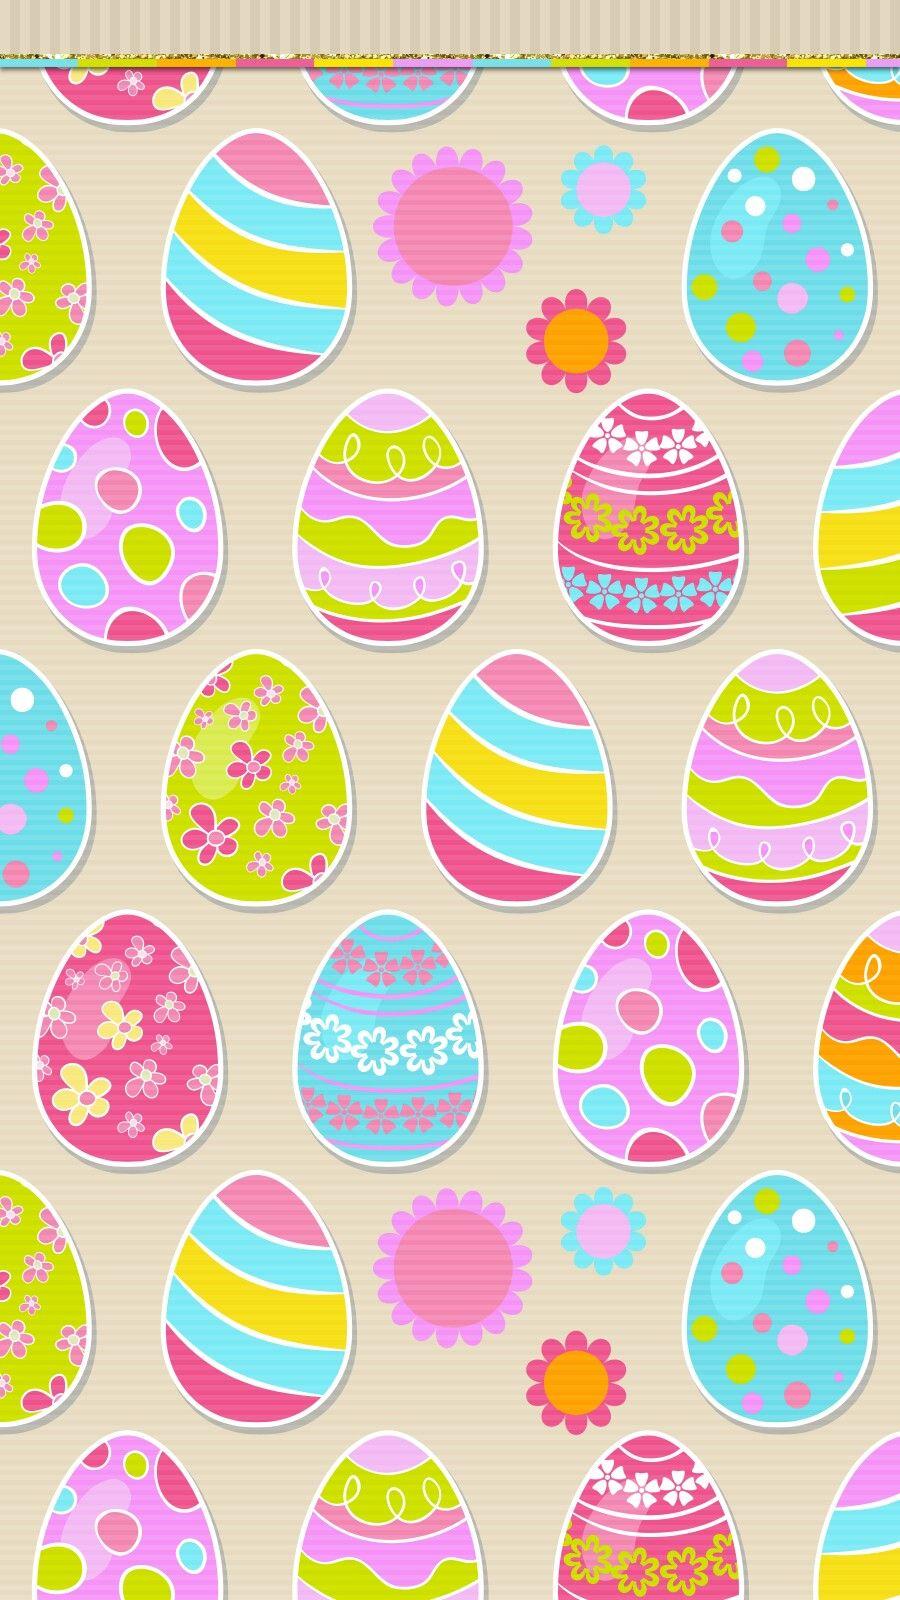 easter #egg #wallpaper #iphone. Cute walls by me♡. Easter